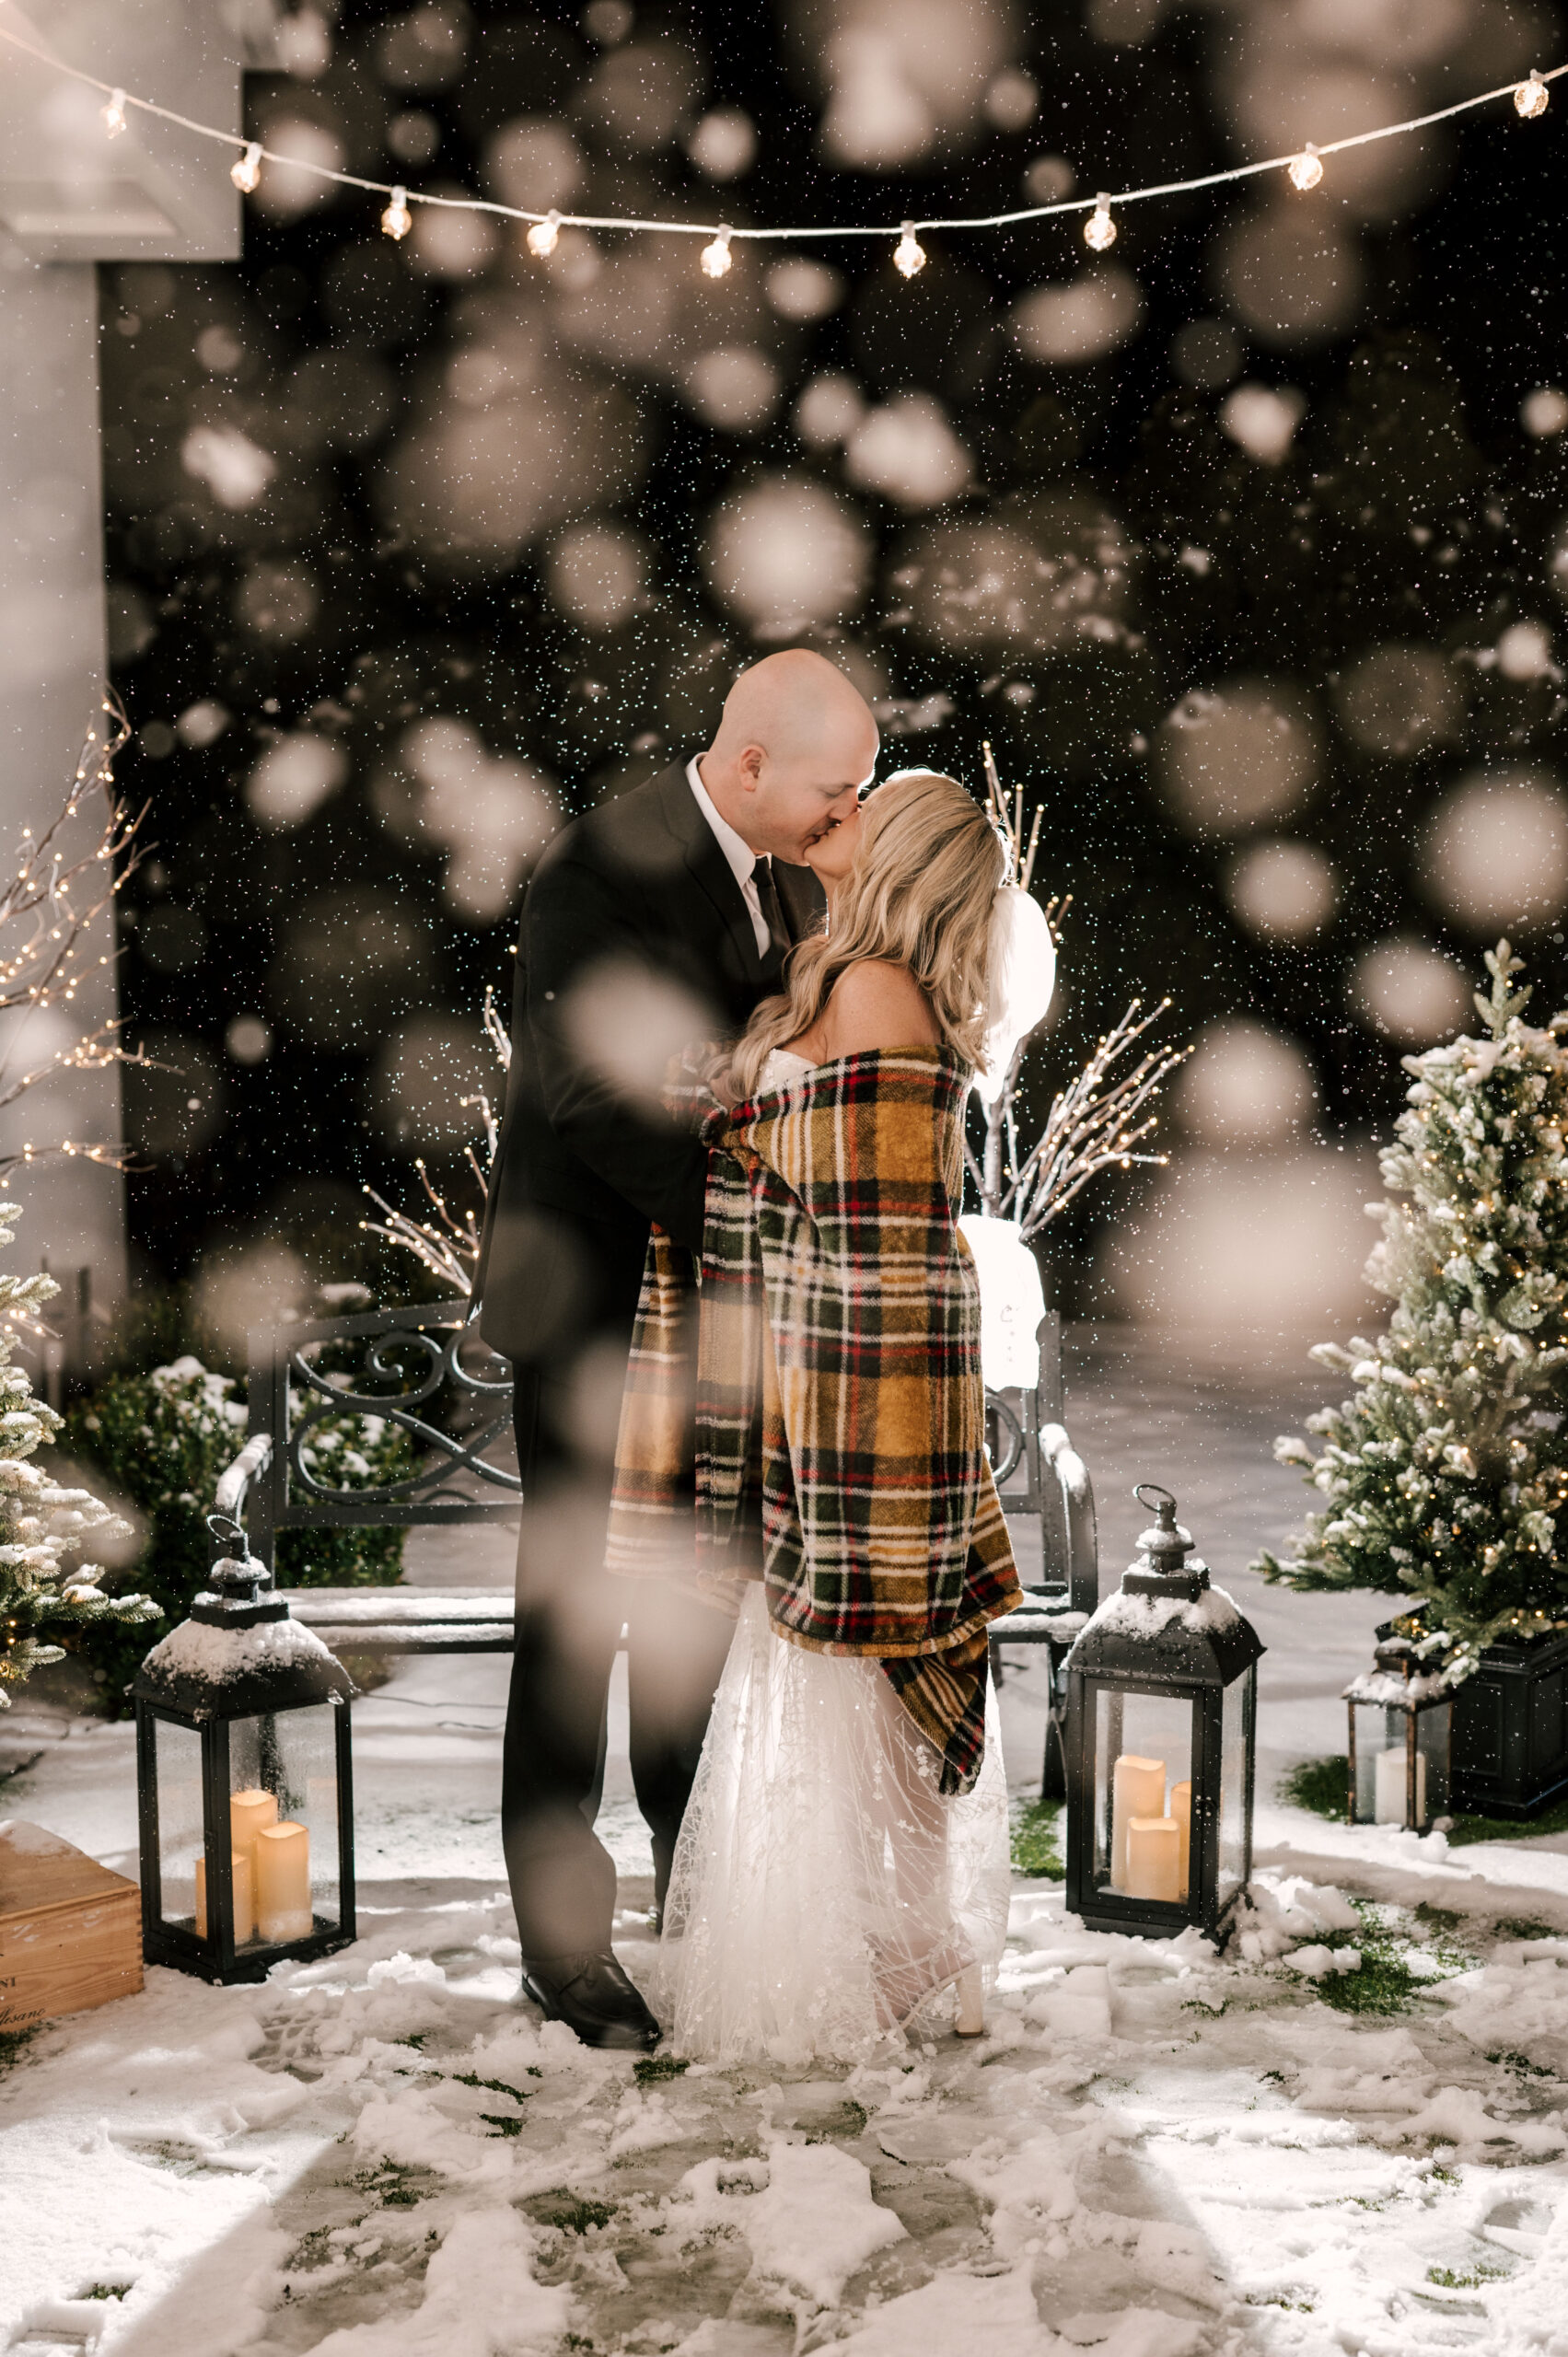 Couple kisses in the snow at Perona Farms Refinery. Night shot from december wedding in Andover, New Jersey